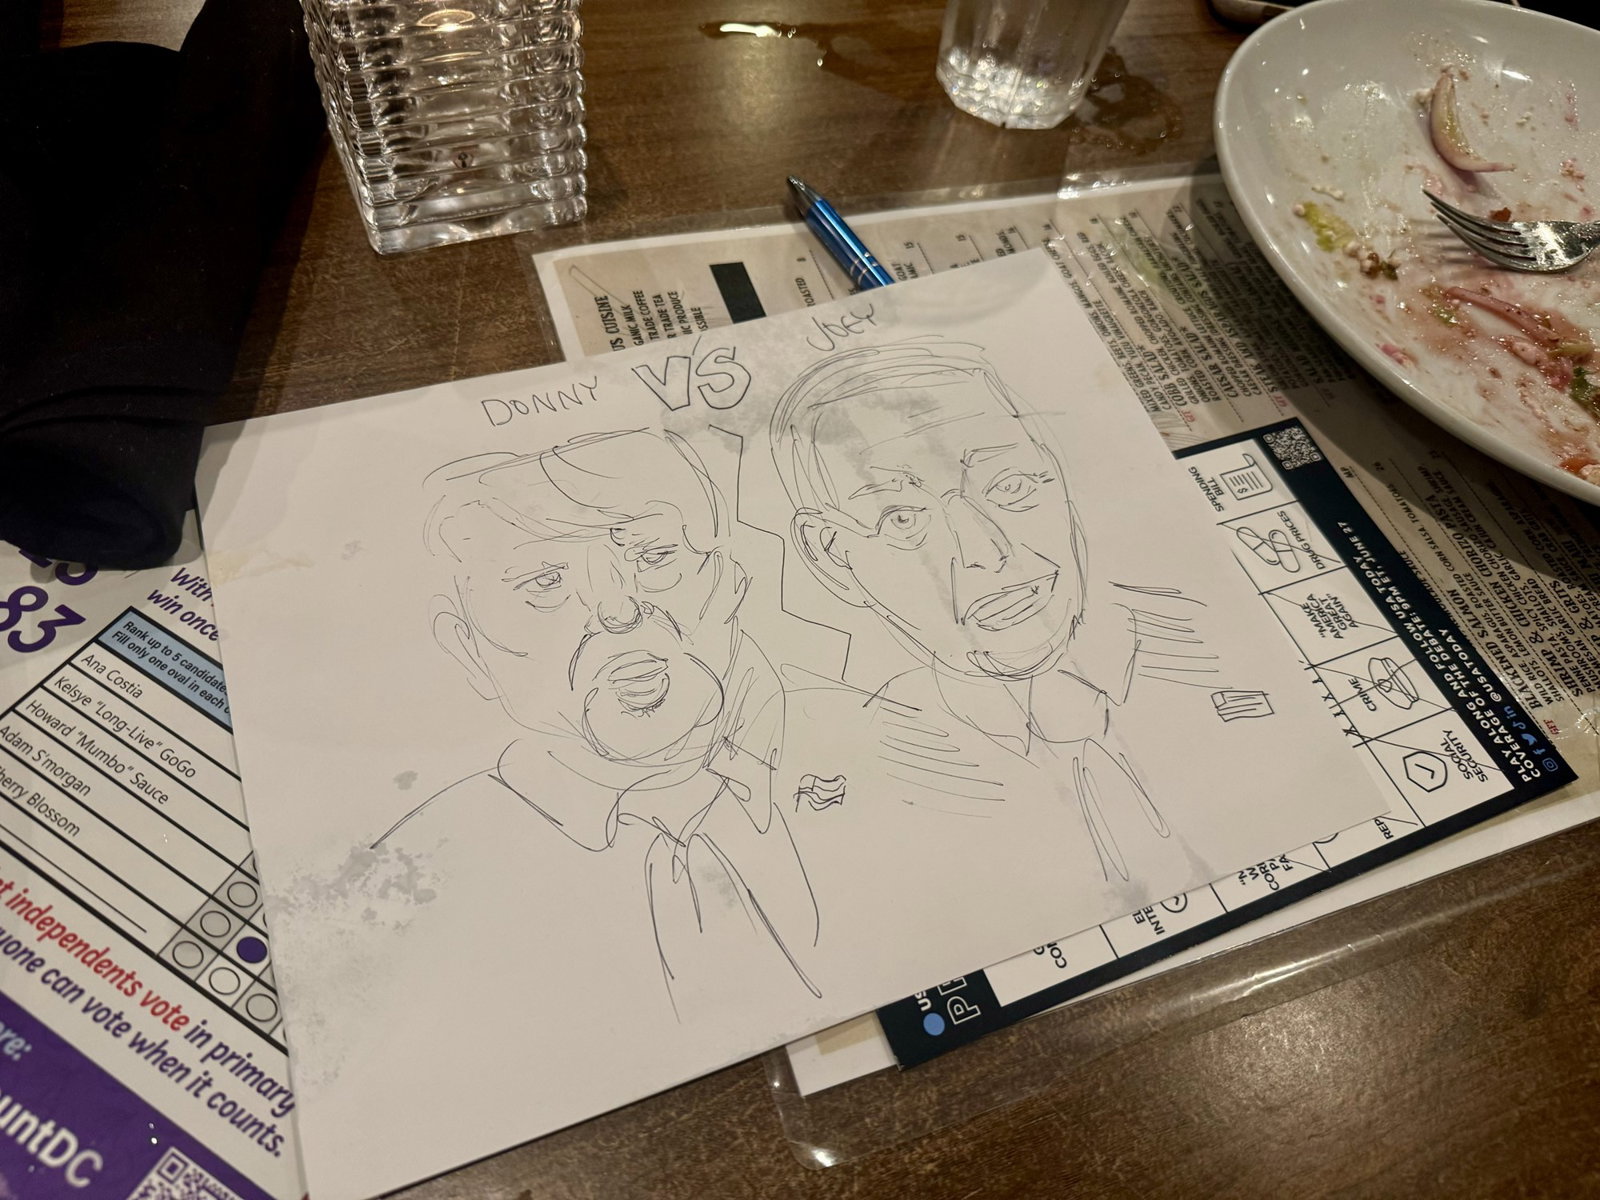 A drawing of Donald Trump and Joe Biden on a table at a pub